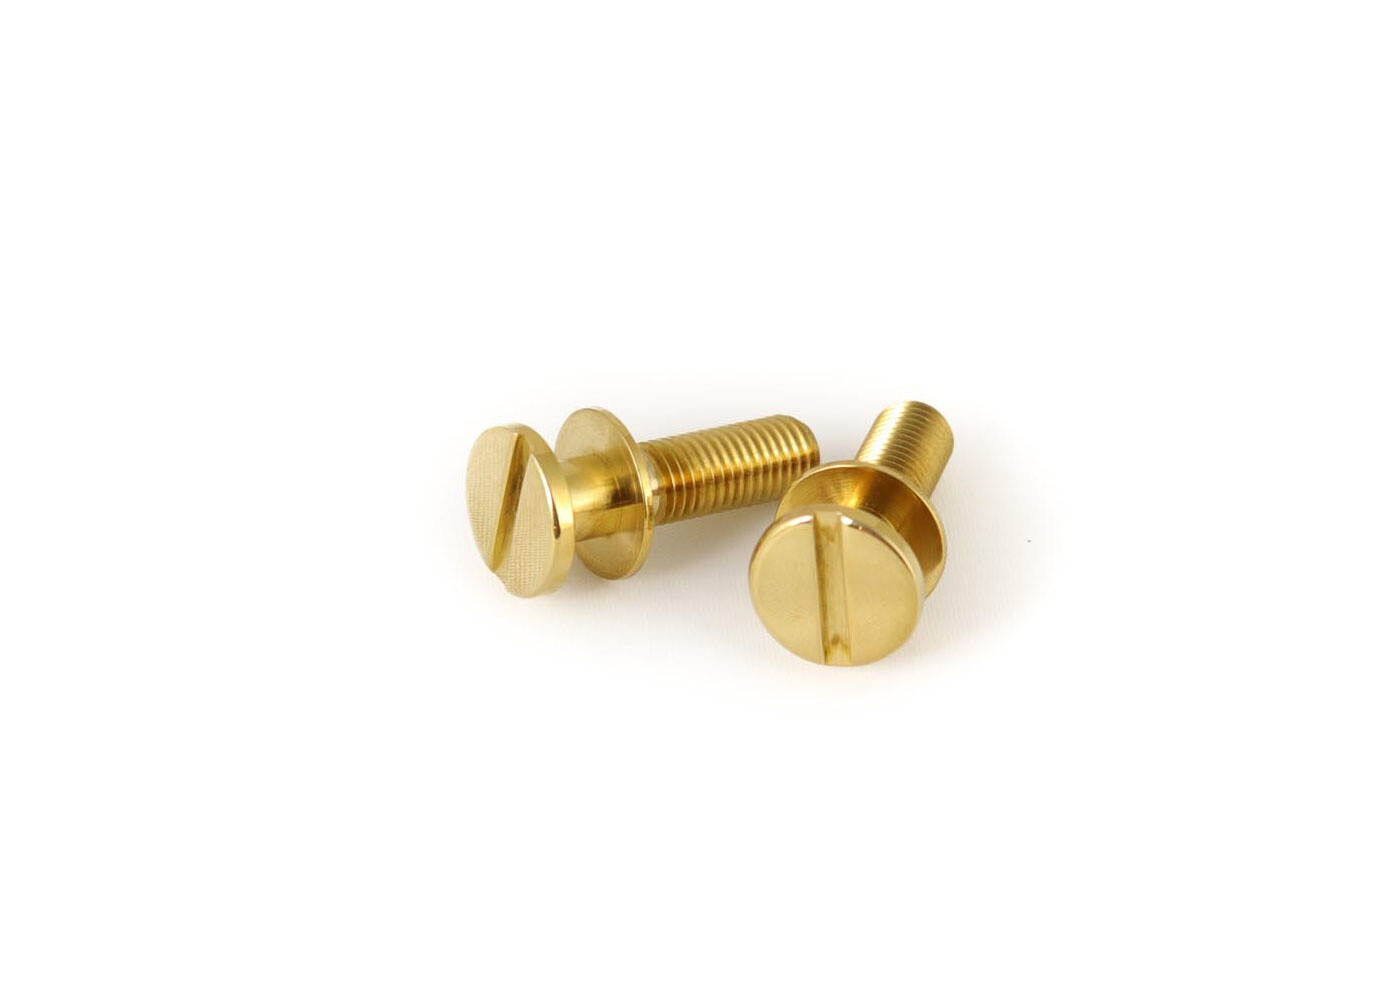 MannMade USA MannMade USA Stoptail Stud set -  Metric Thread - Brass Polished